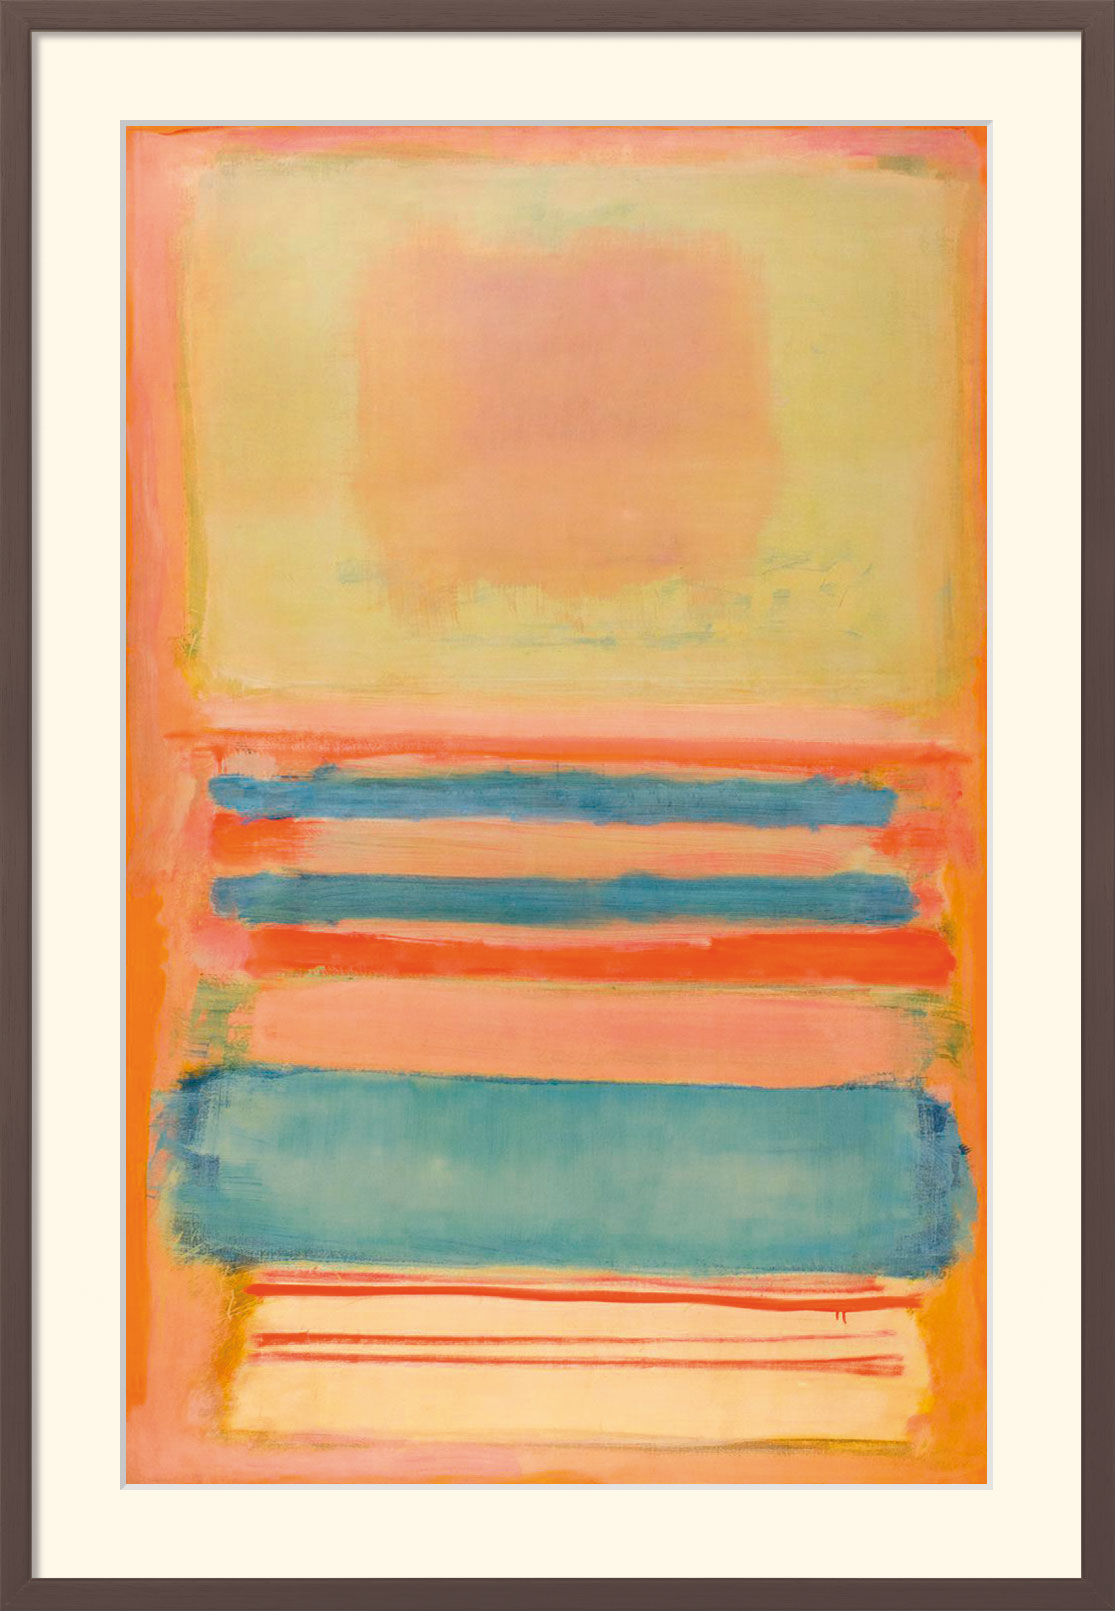 Picture "No. 7 or No. 11" (1949), framed by Mark Rothko